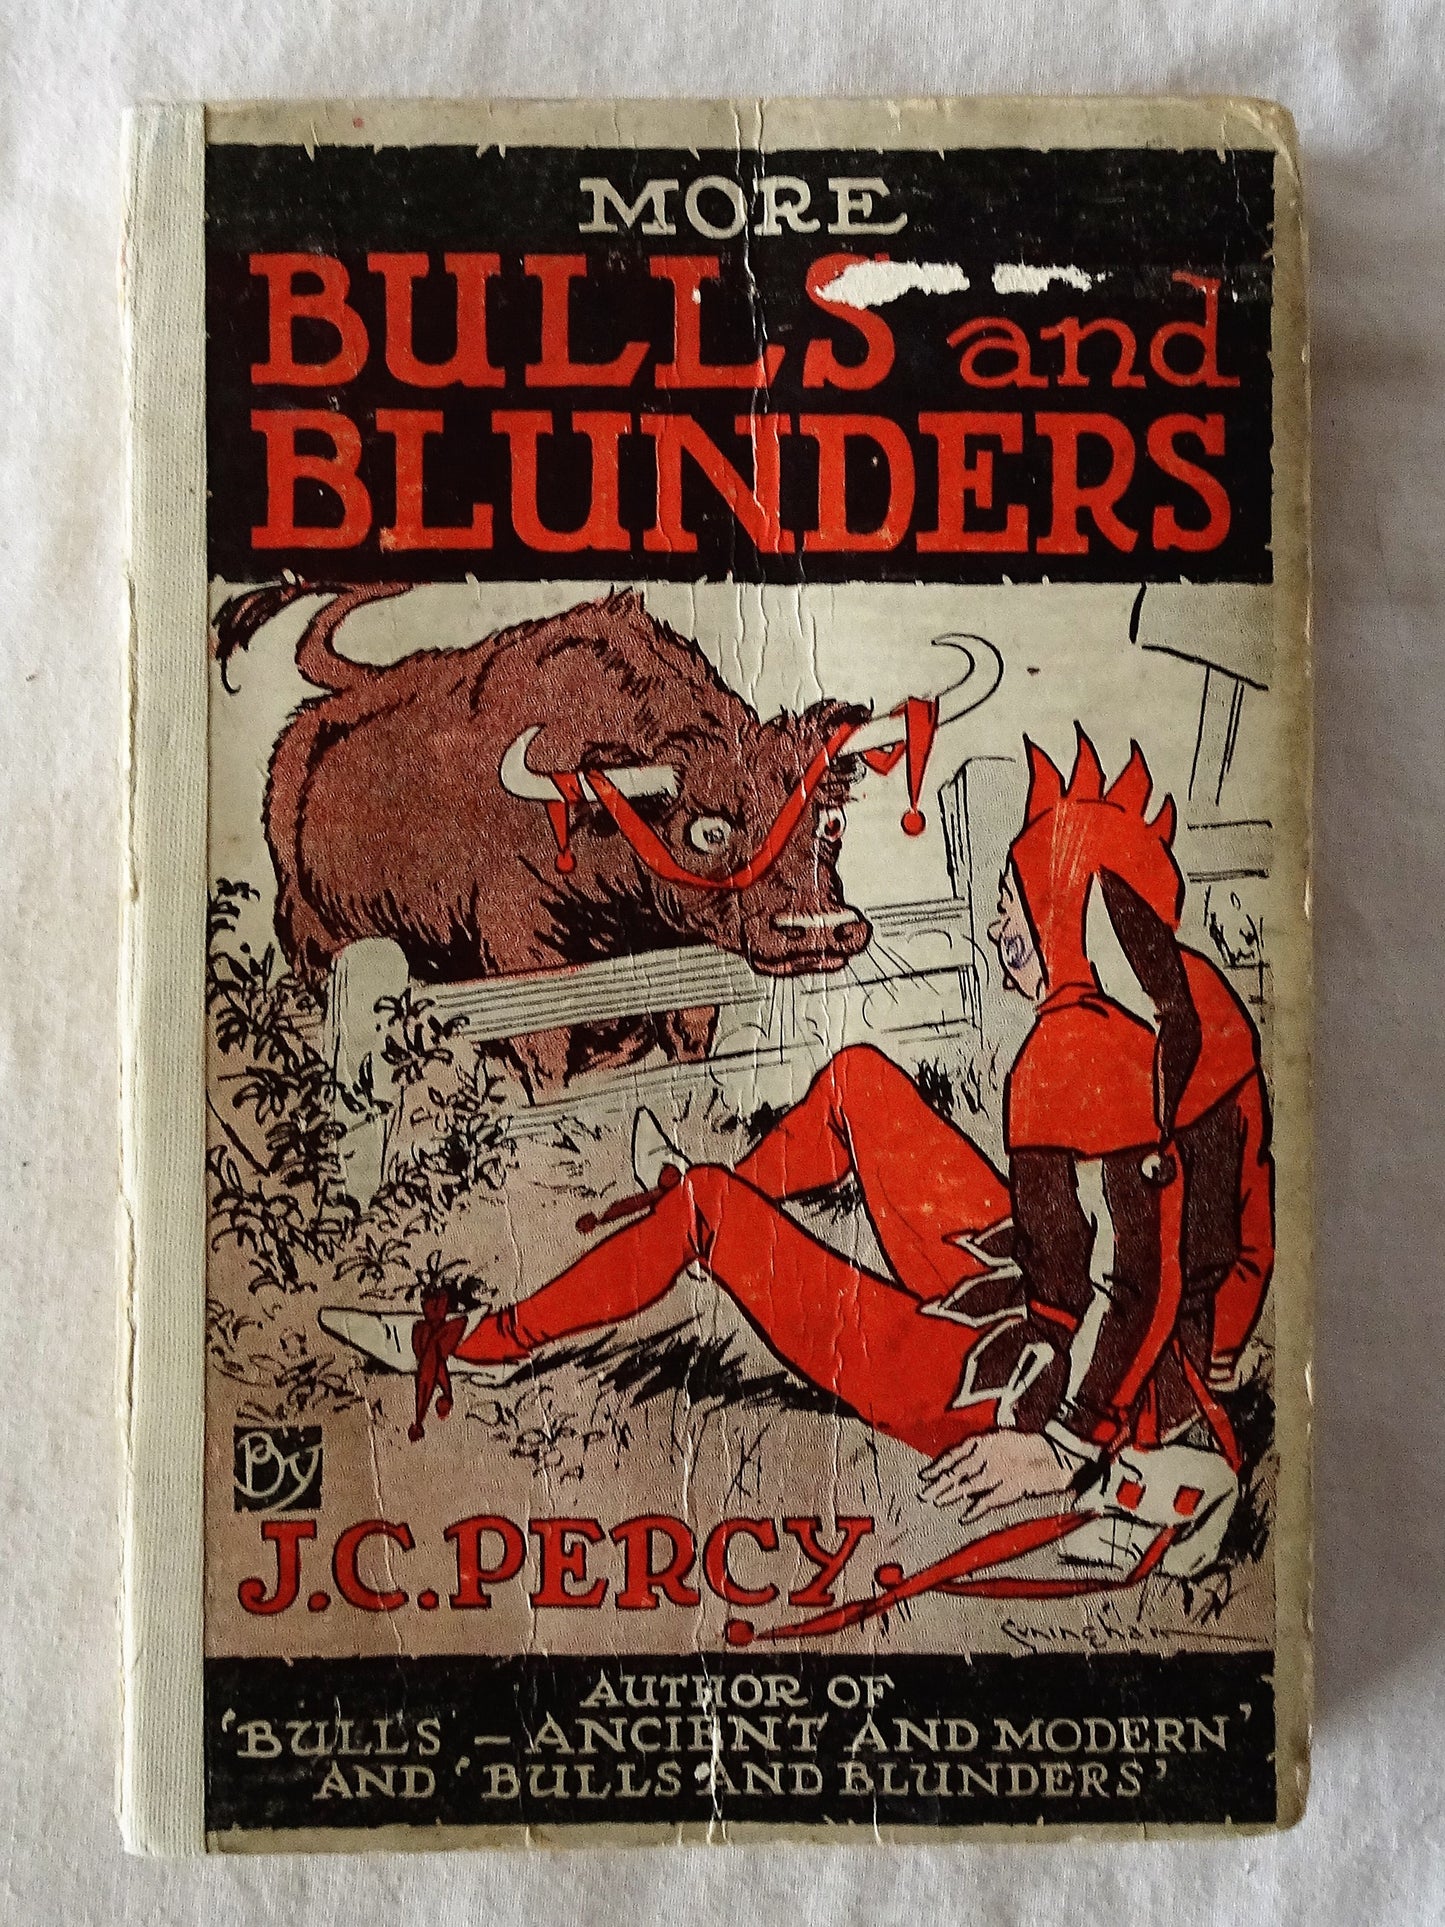 More Bulls and Blunders by J. C. Percy